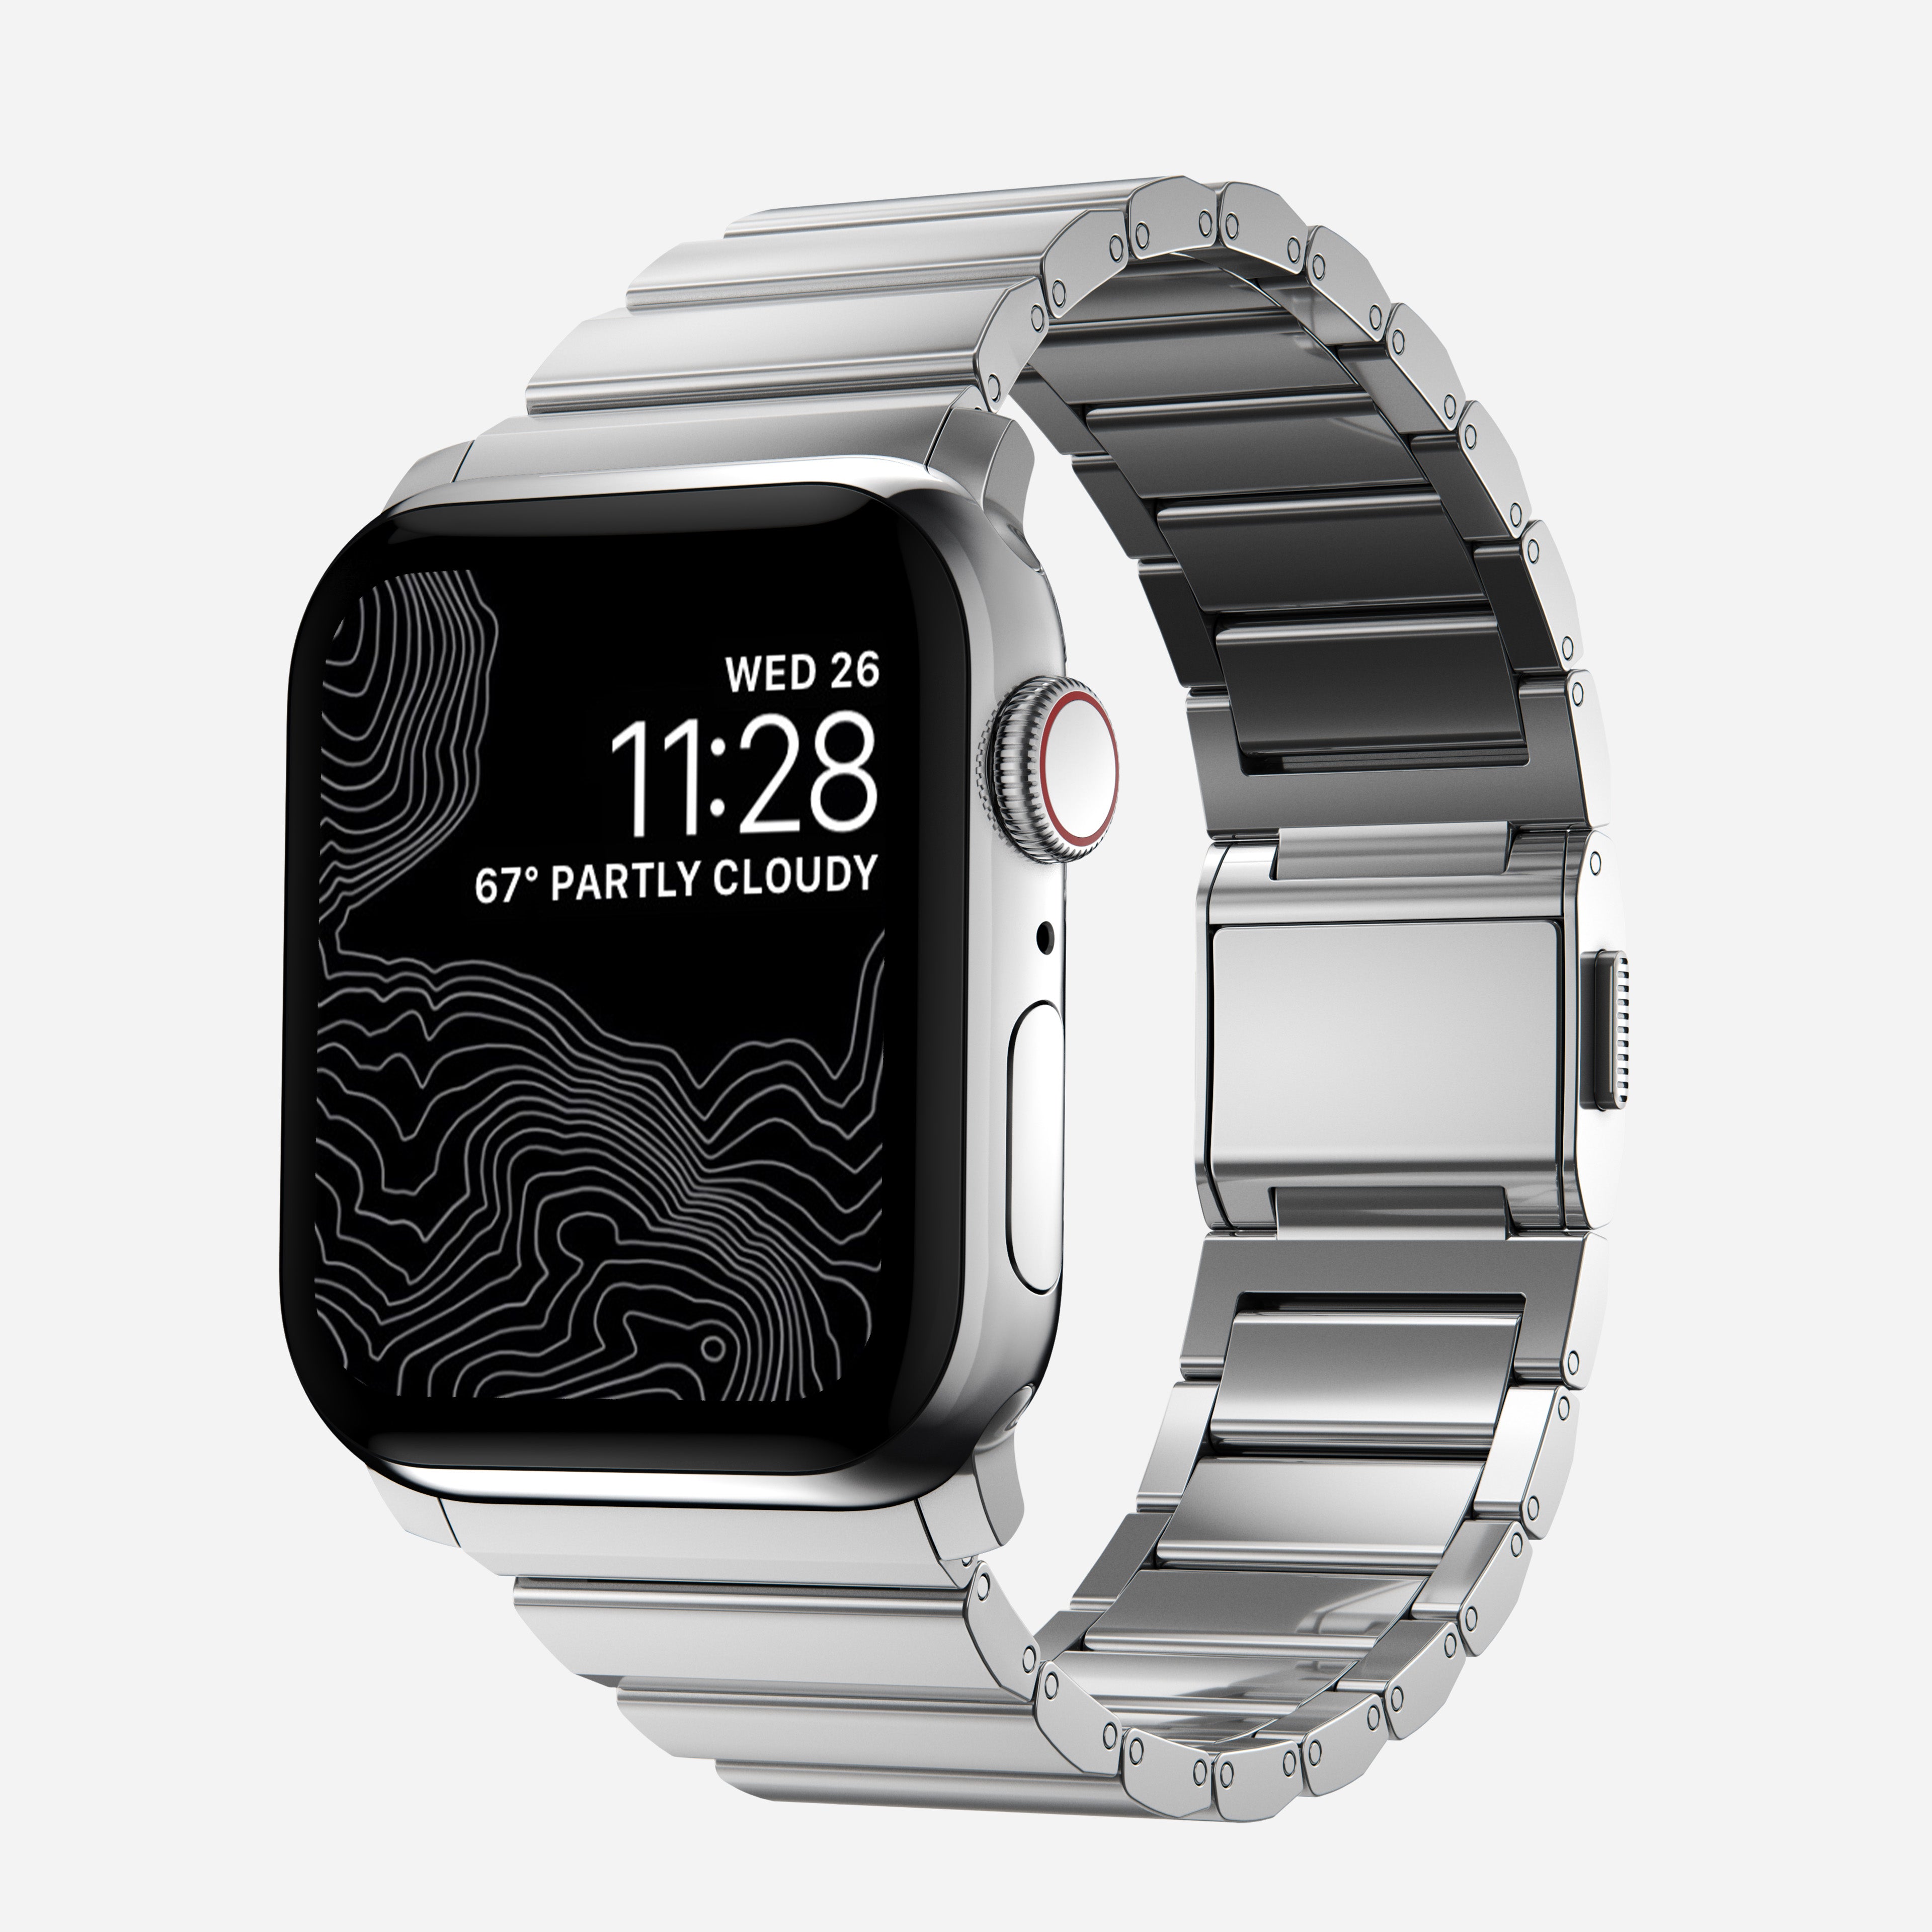 Apple Watch with Stainless Steel, Magnetic Clasp Design